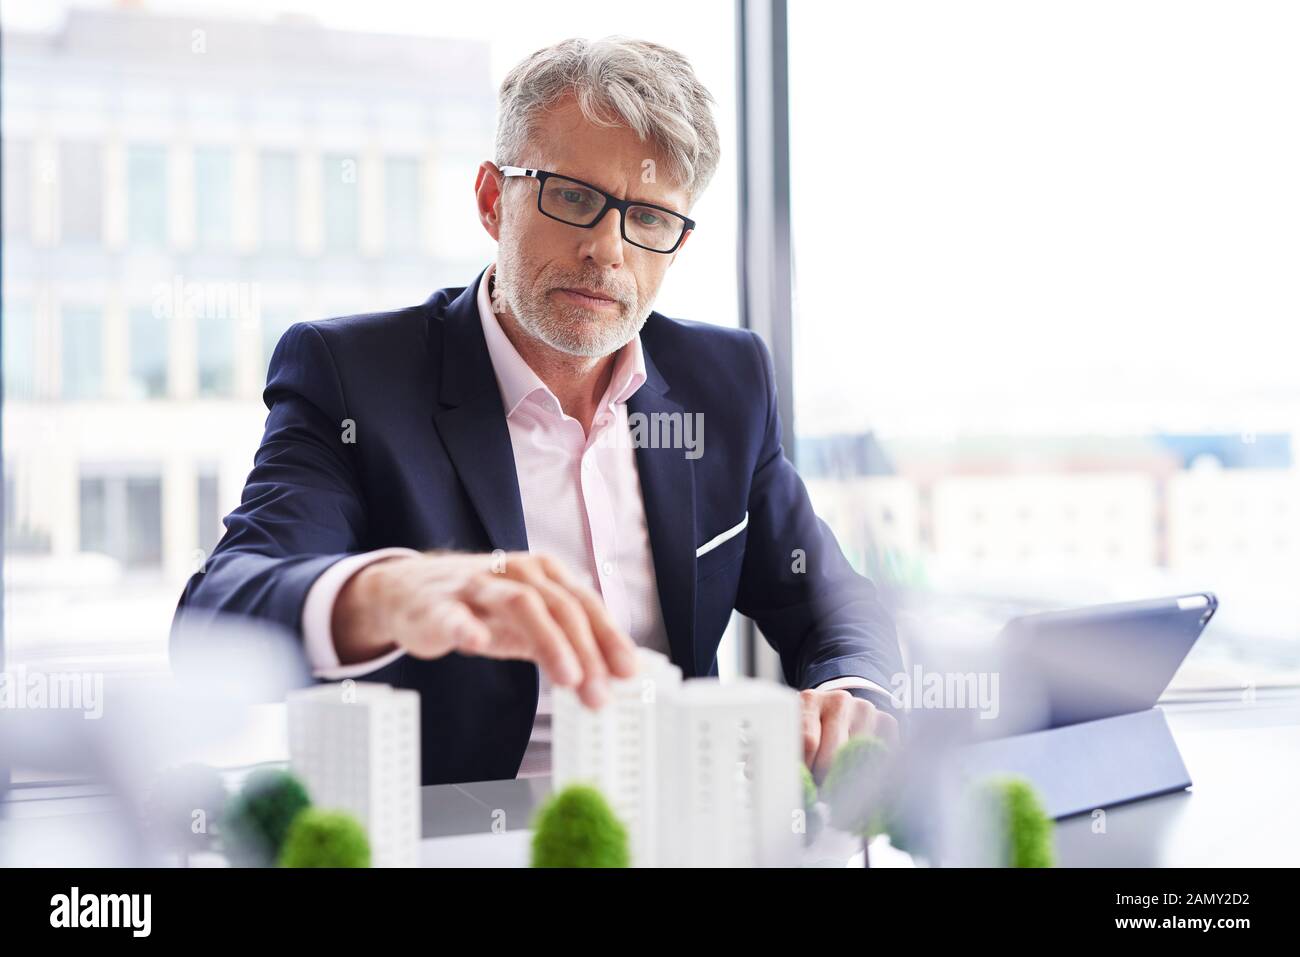 Focused businessman looking for new solutions Stock Photo